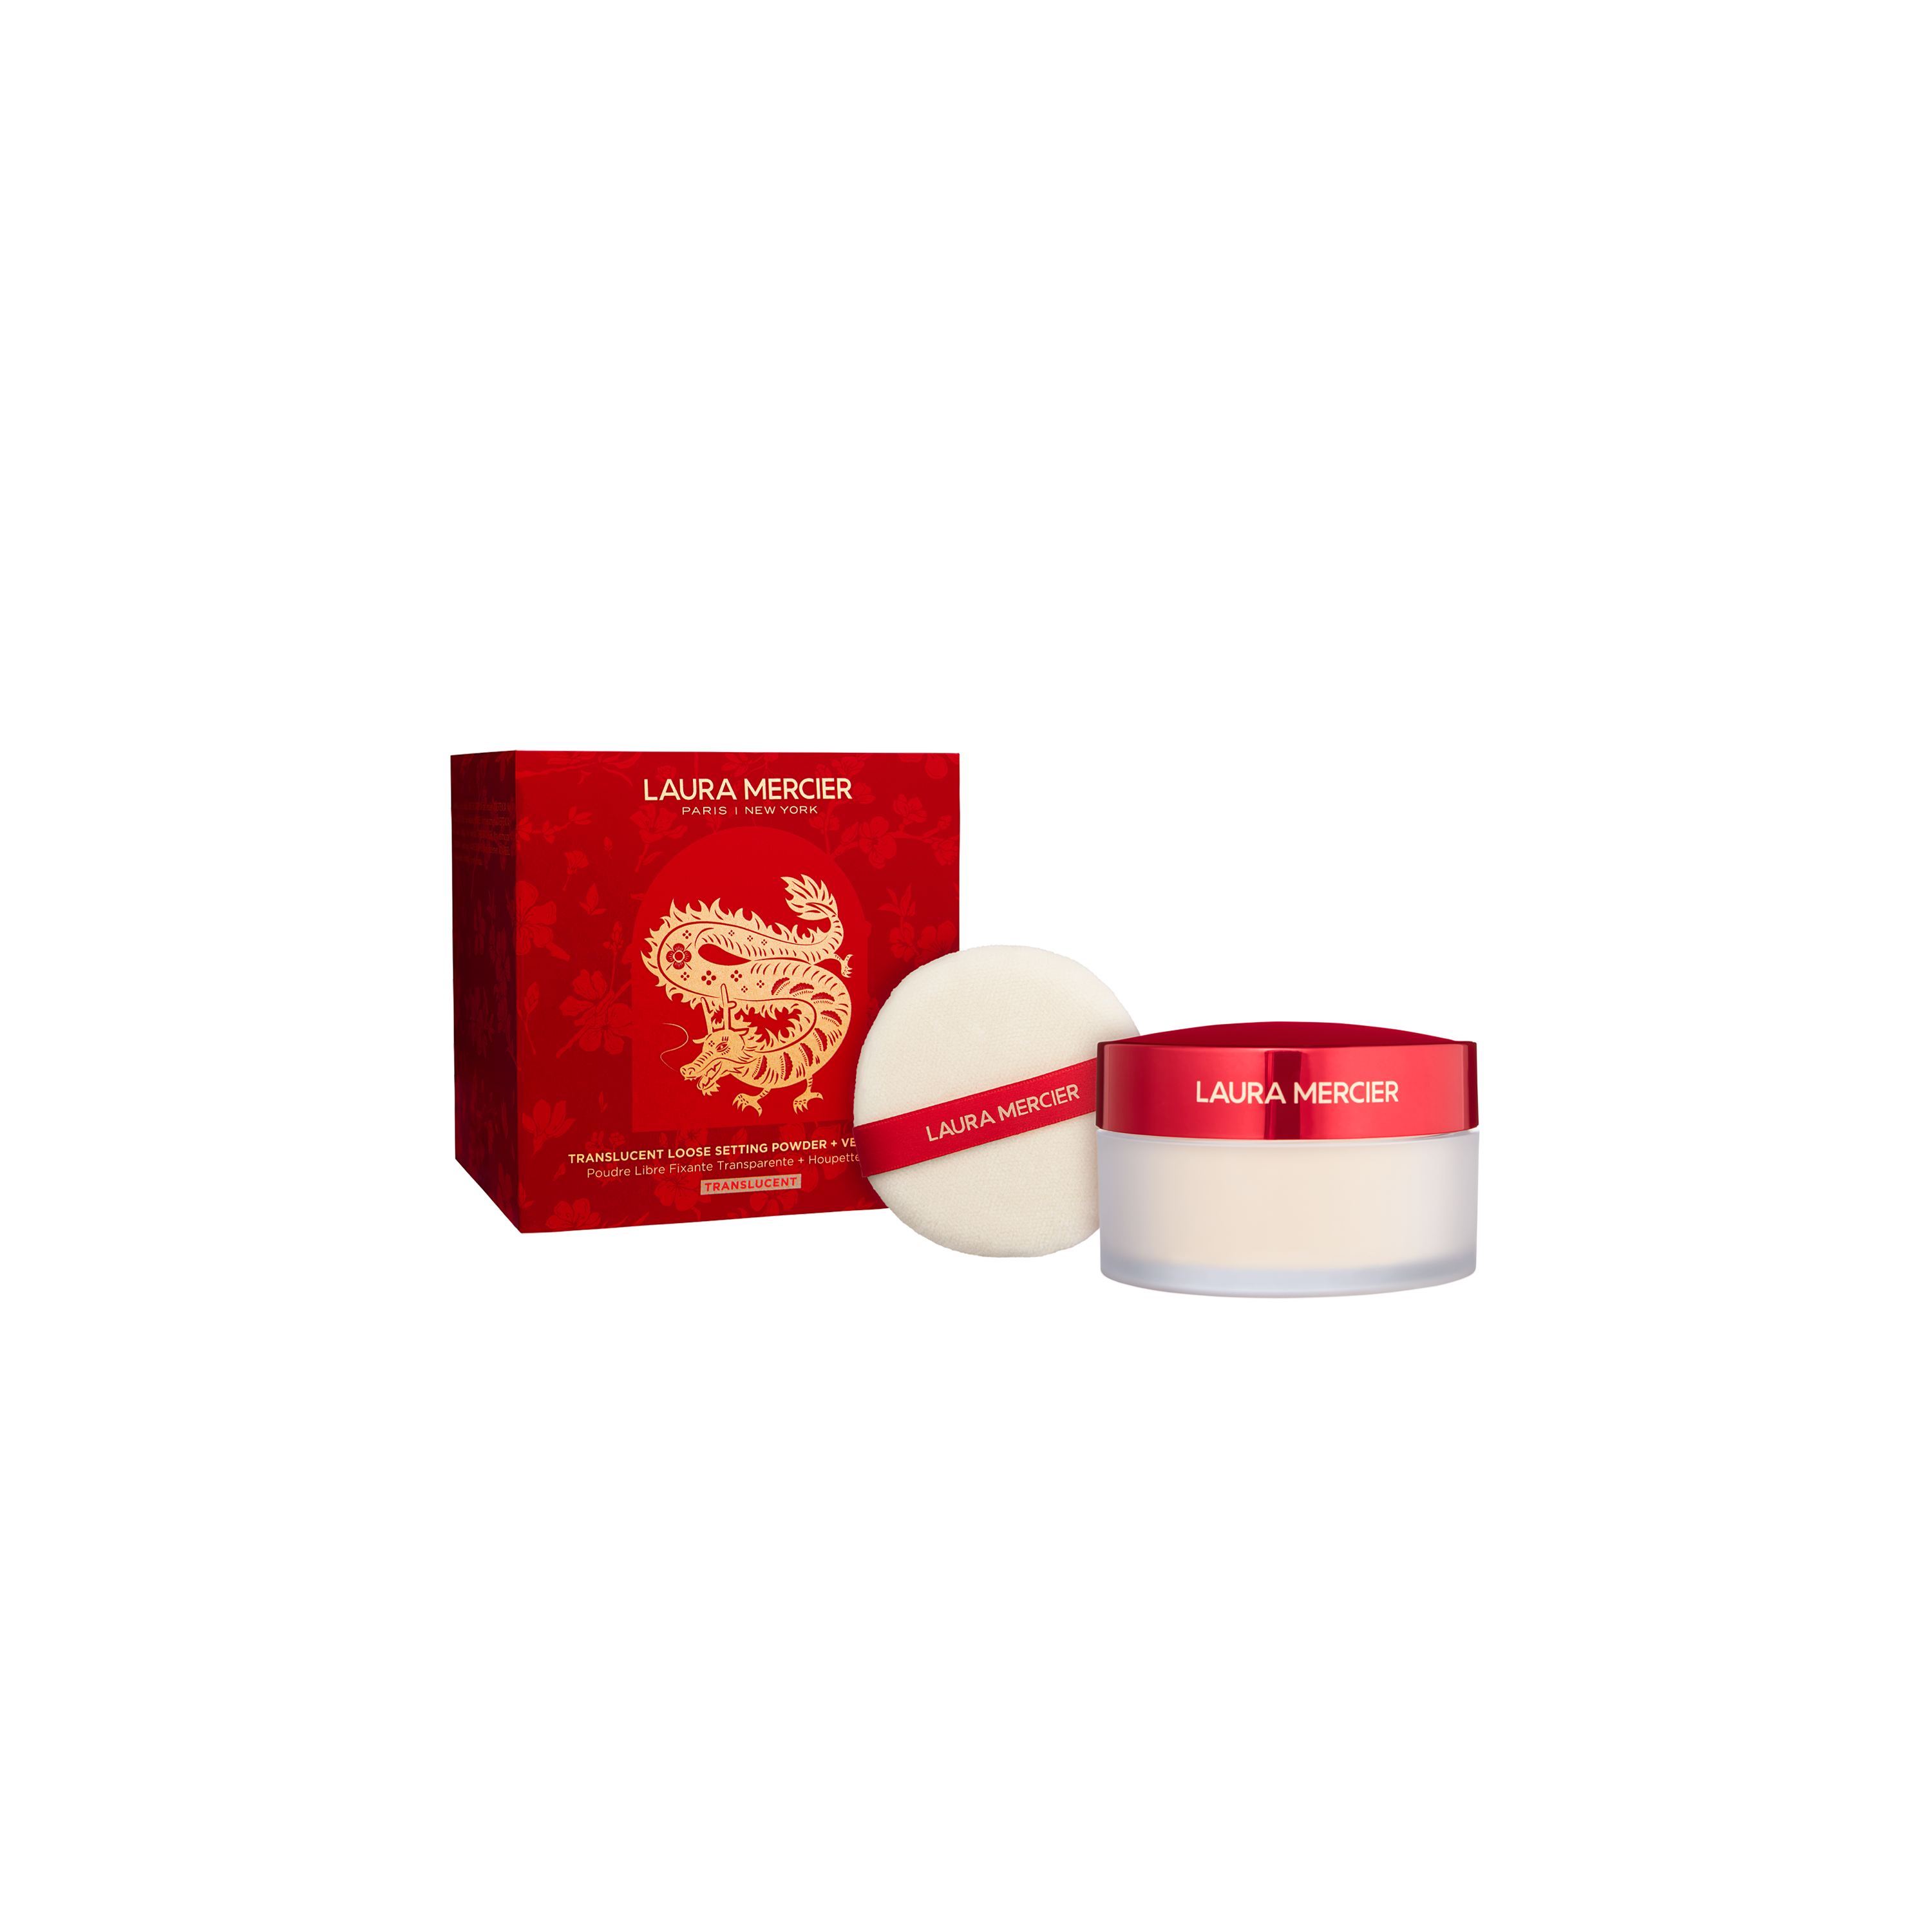 Lunar New Year Translucent Loose Setting Powder & Velour Puff Set Limited Edition